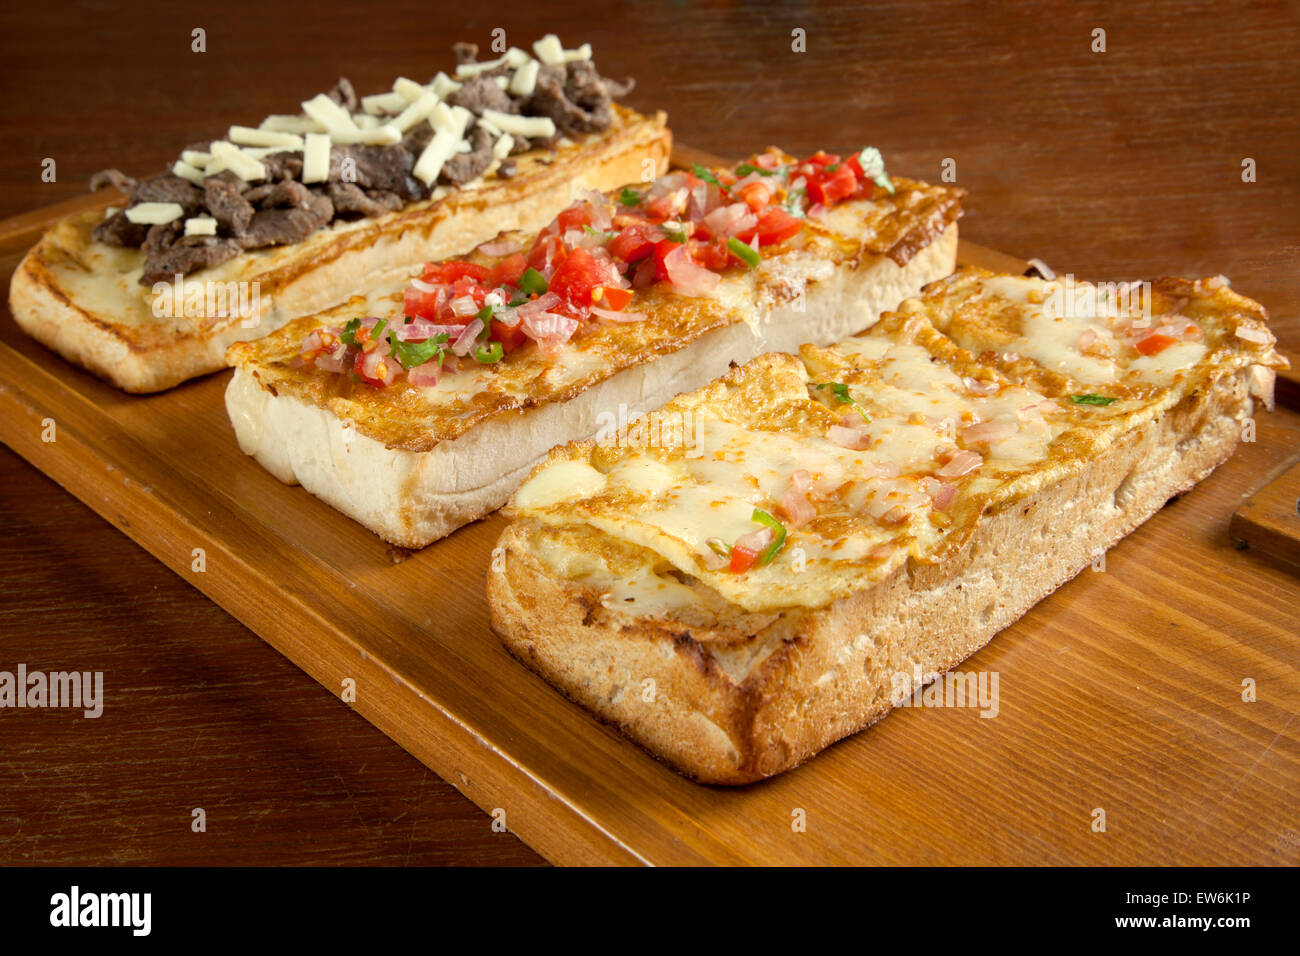 Toasted open faced omelette egg sandwich with melted mozzarella cheese Stock Photo